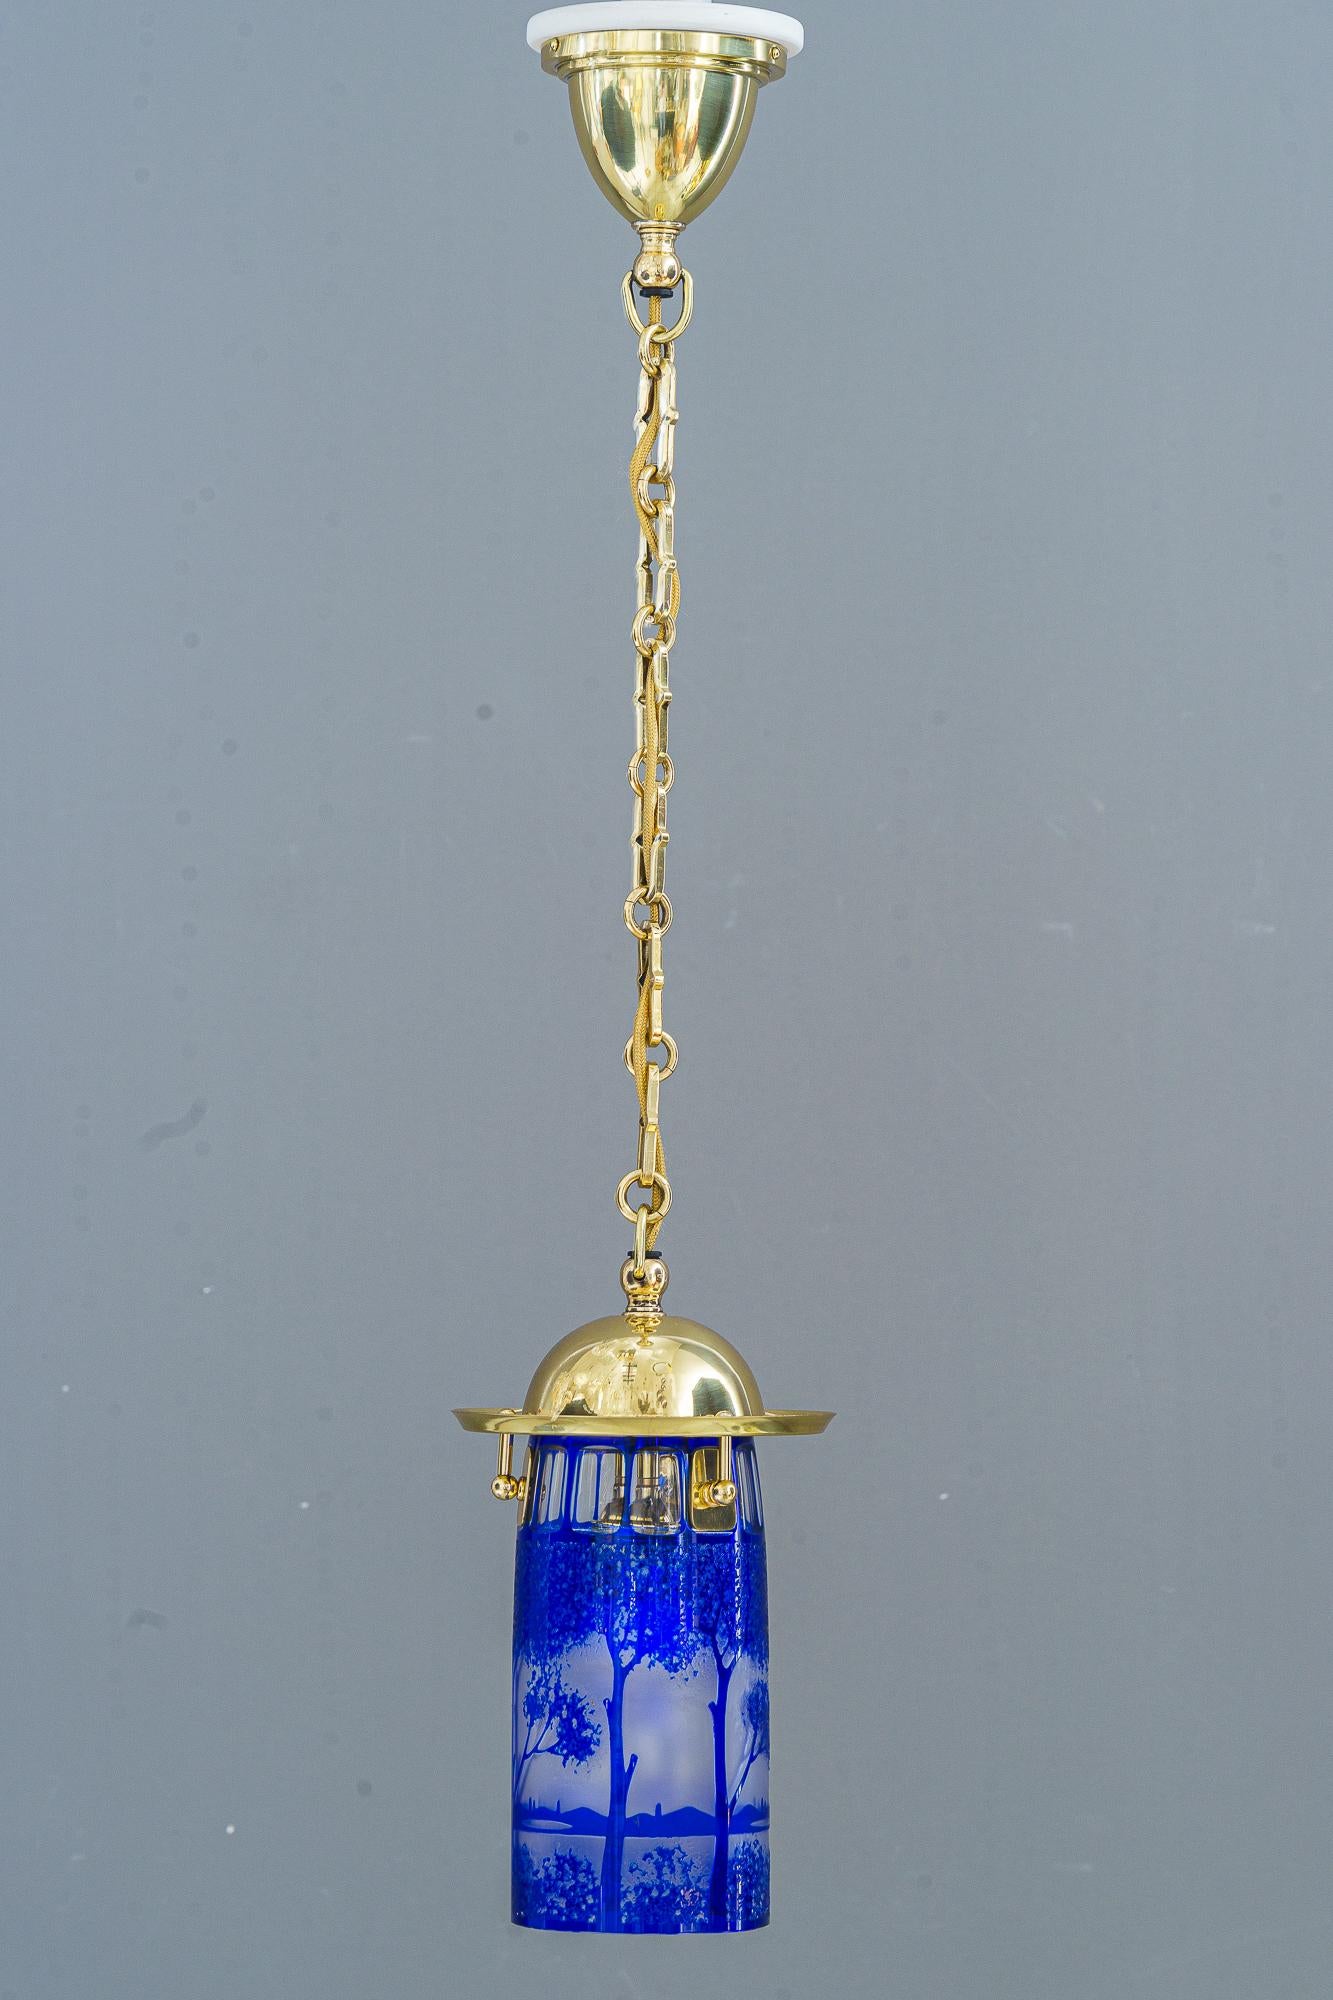 Art Deco pendant vienna with original antique cut glass shade around 1920s
Brass polished and stove enameled
Original antique cut gllass shade